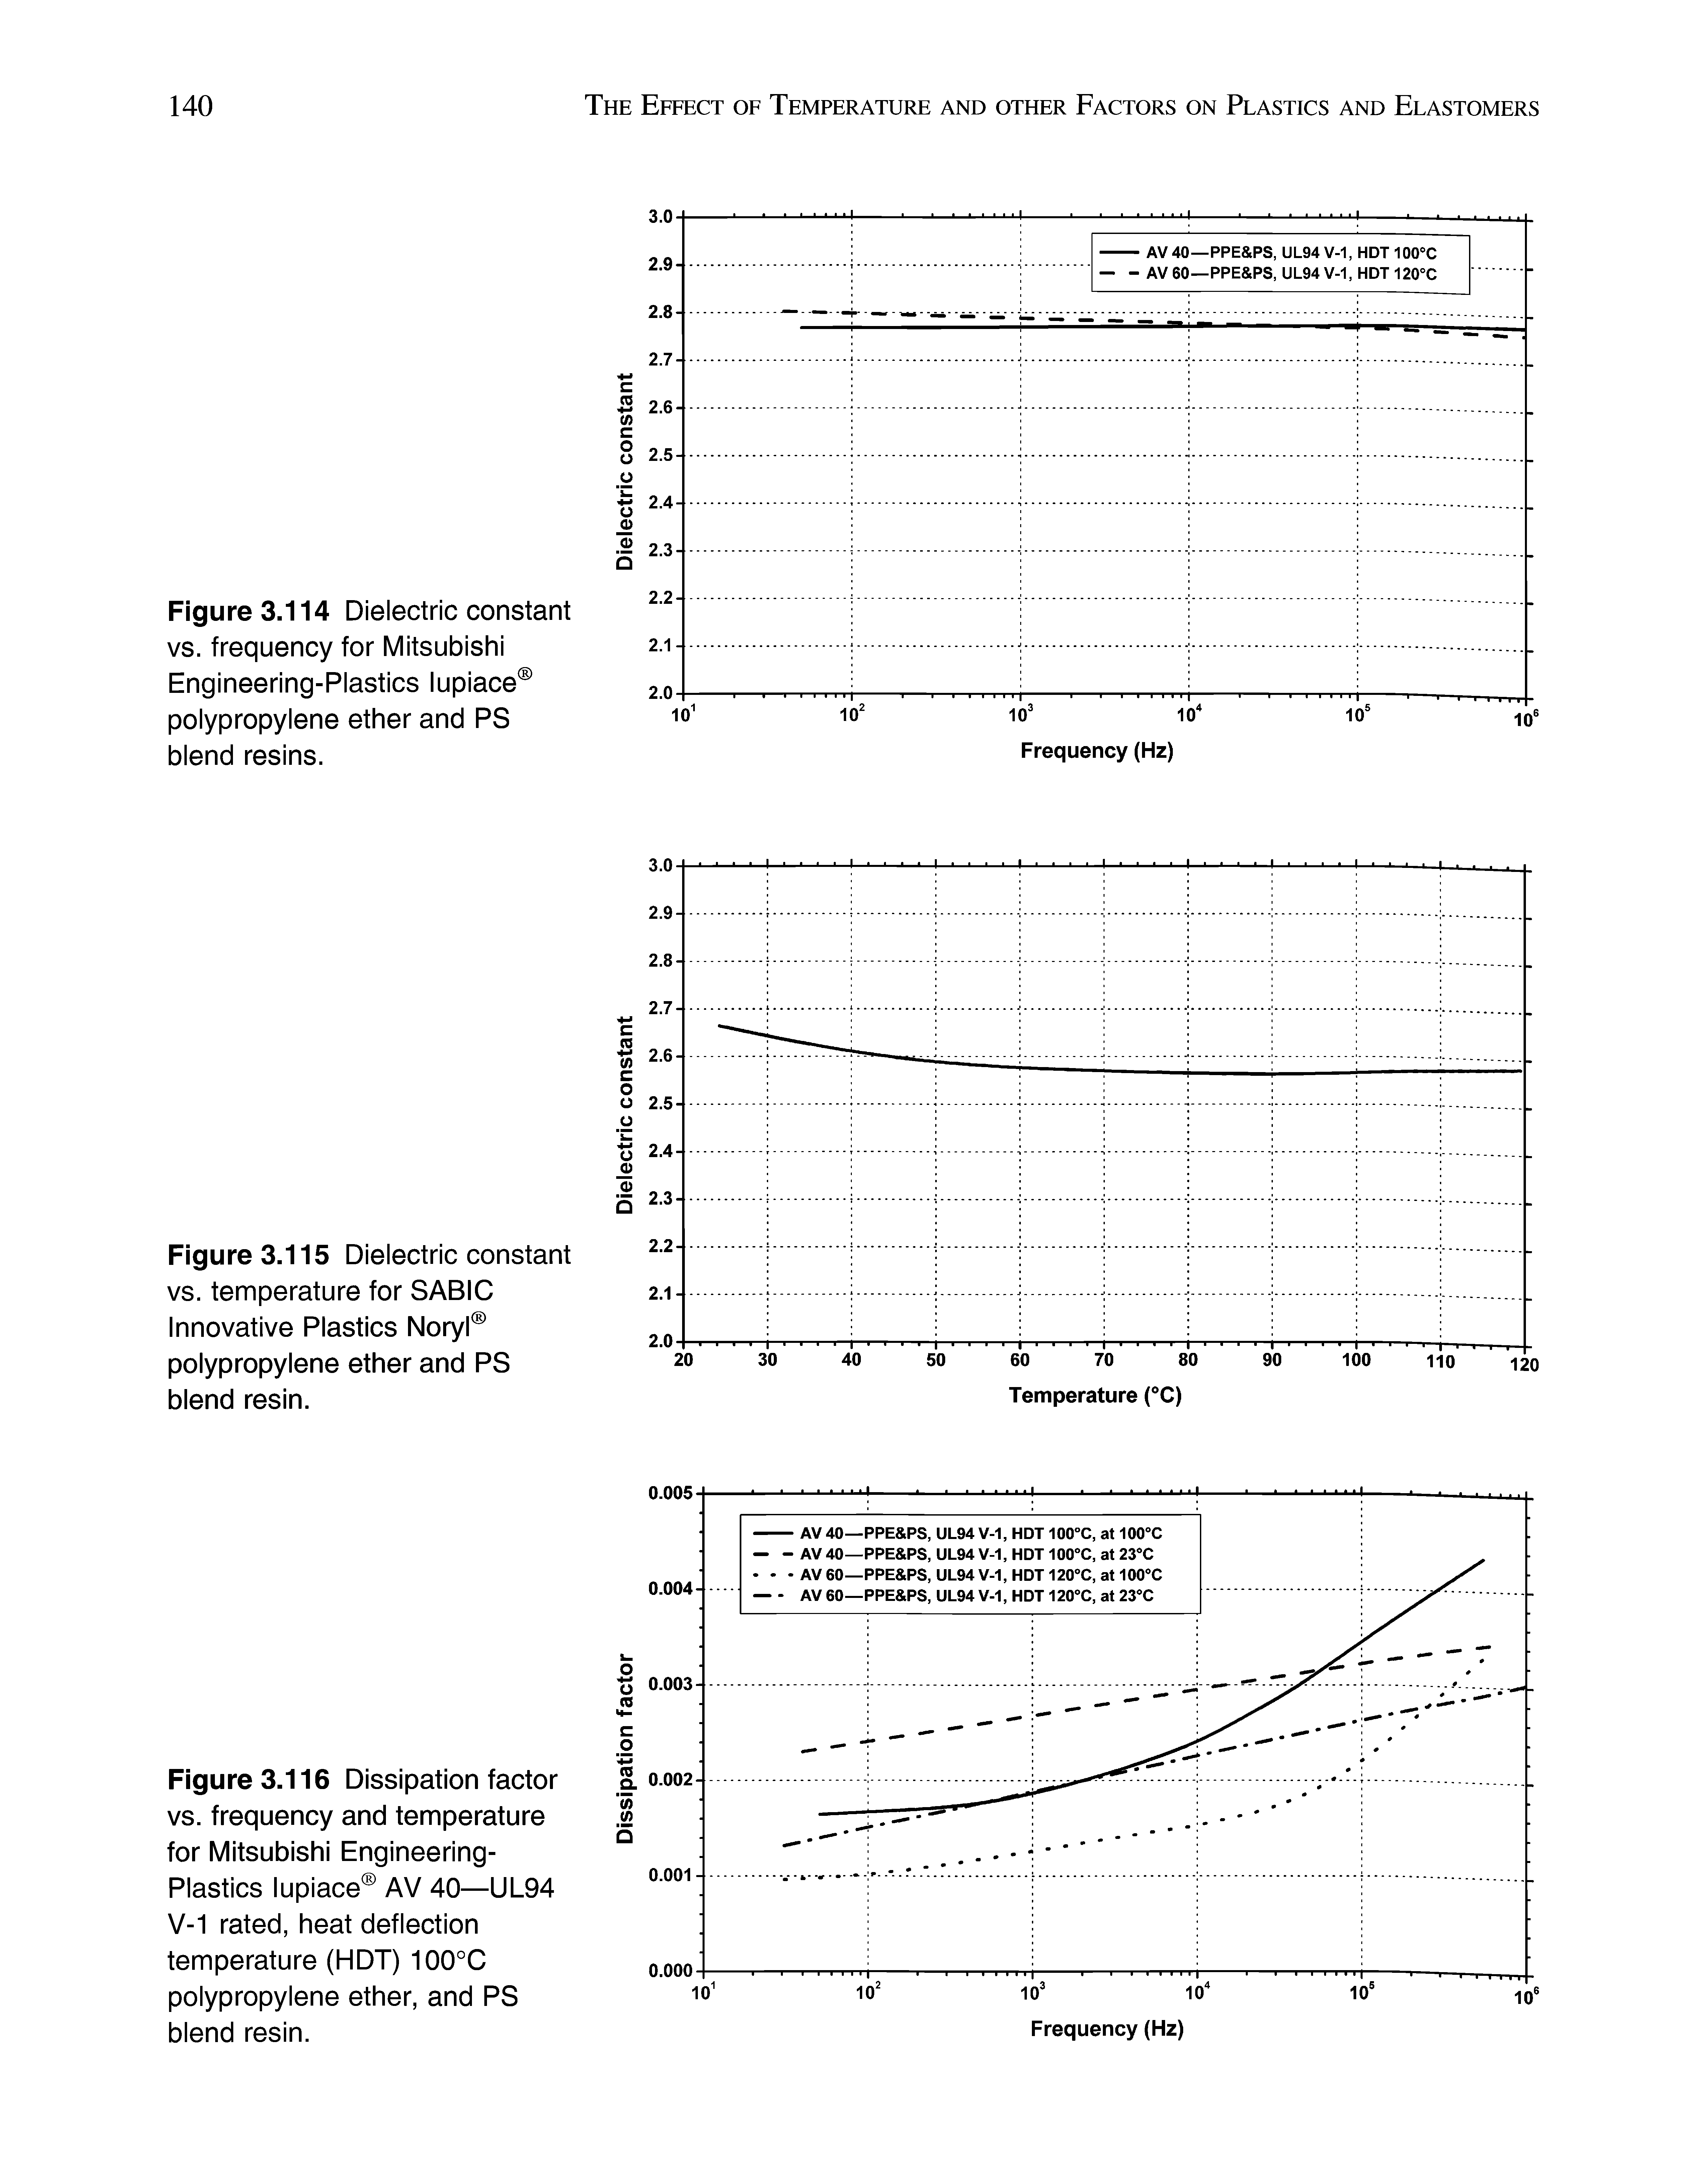 Figure 3.116 Dissipation factor vs. frequency and temperature for Mitsubishi Engineering-Plastics lupiace AV 40—UL94 V-1 rated, heat deflection temperature (HDT) 100°C polypropylene ether, and PS blend resin.